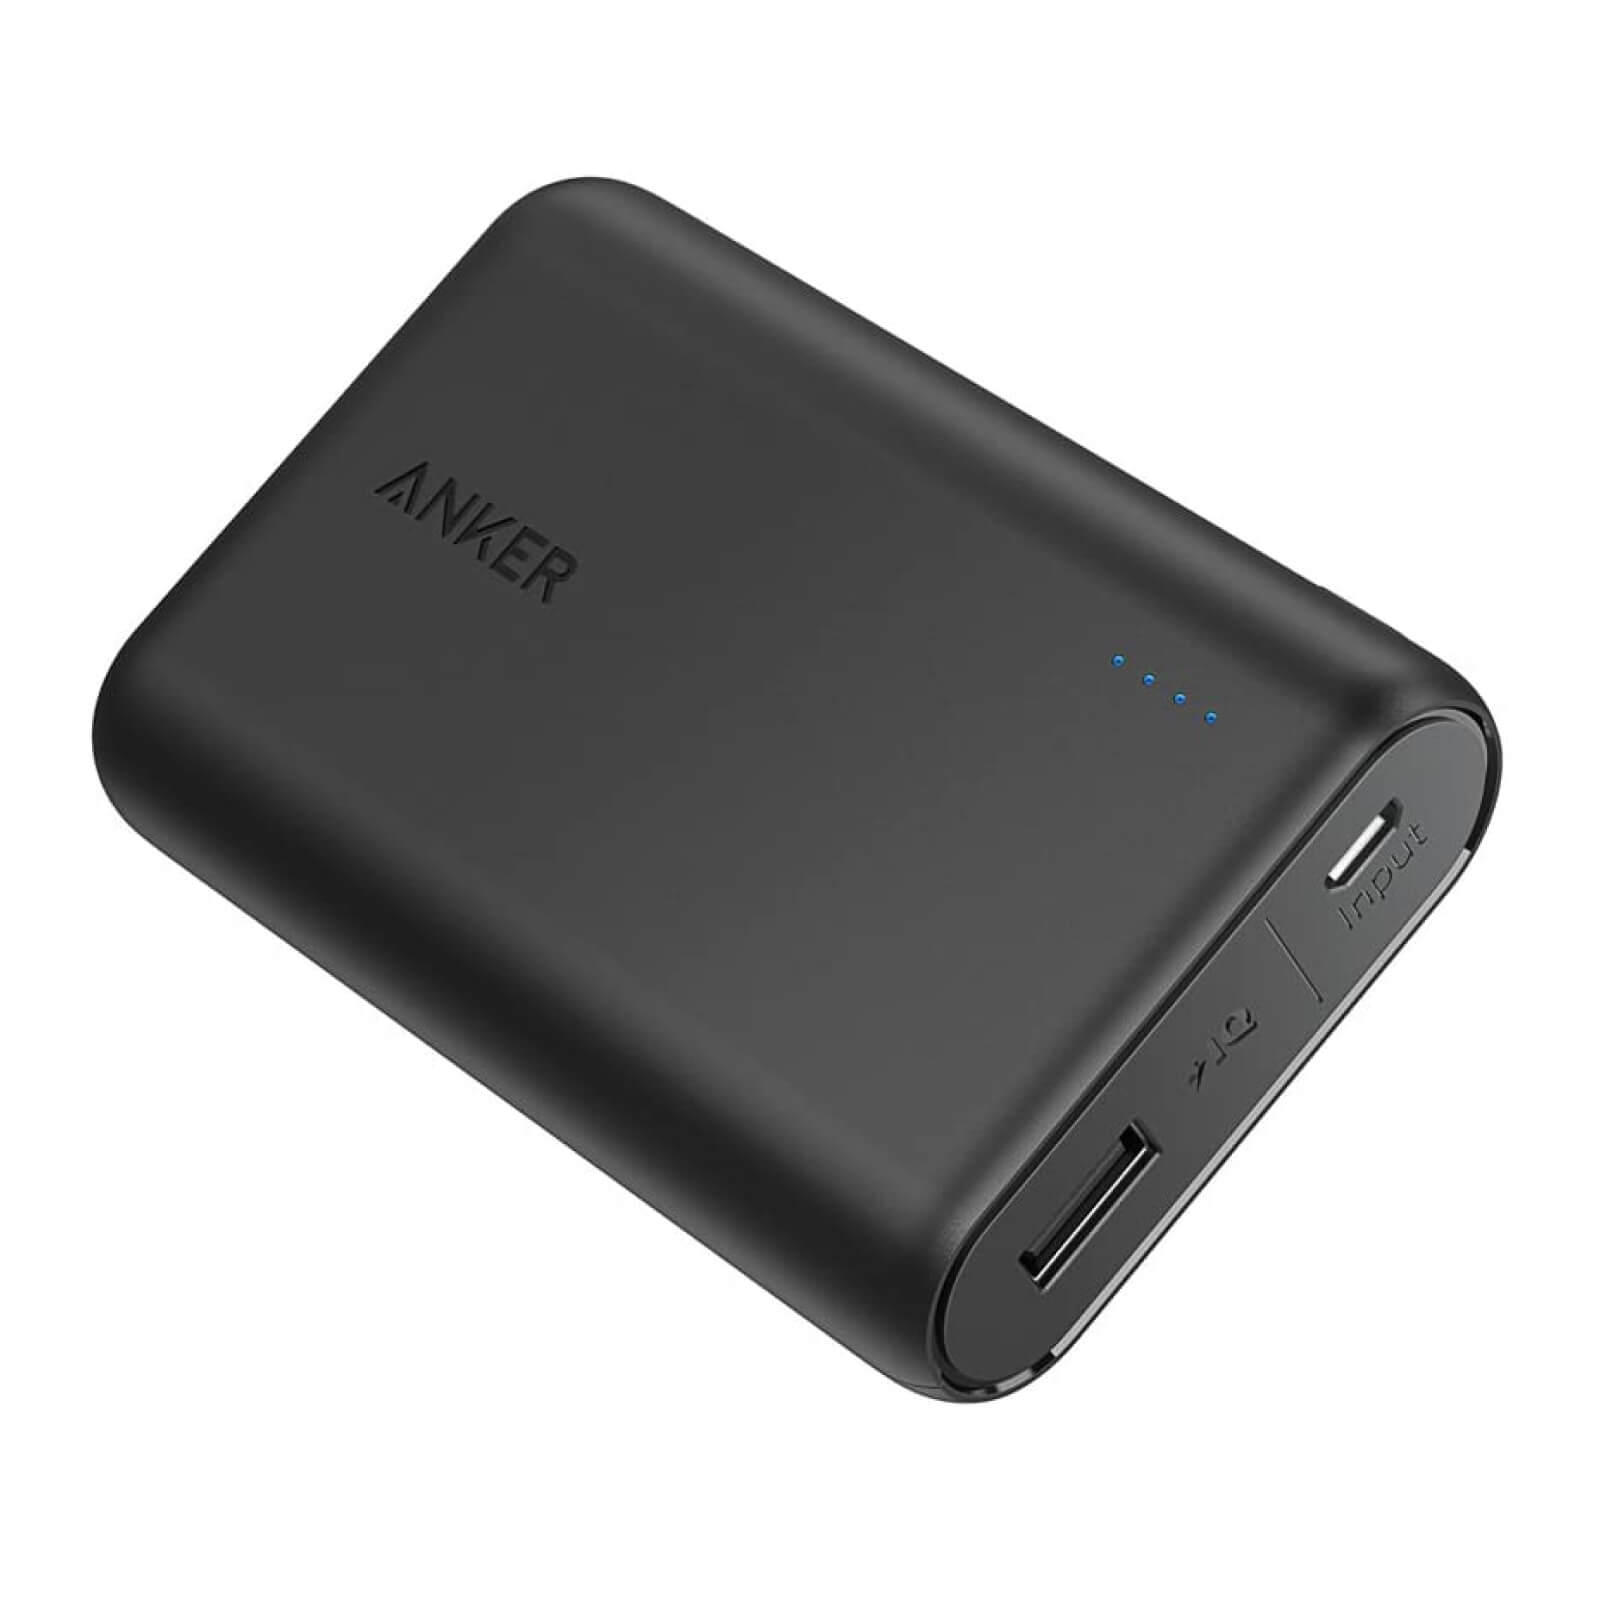 Anker Powercore 10000 Battery Charger